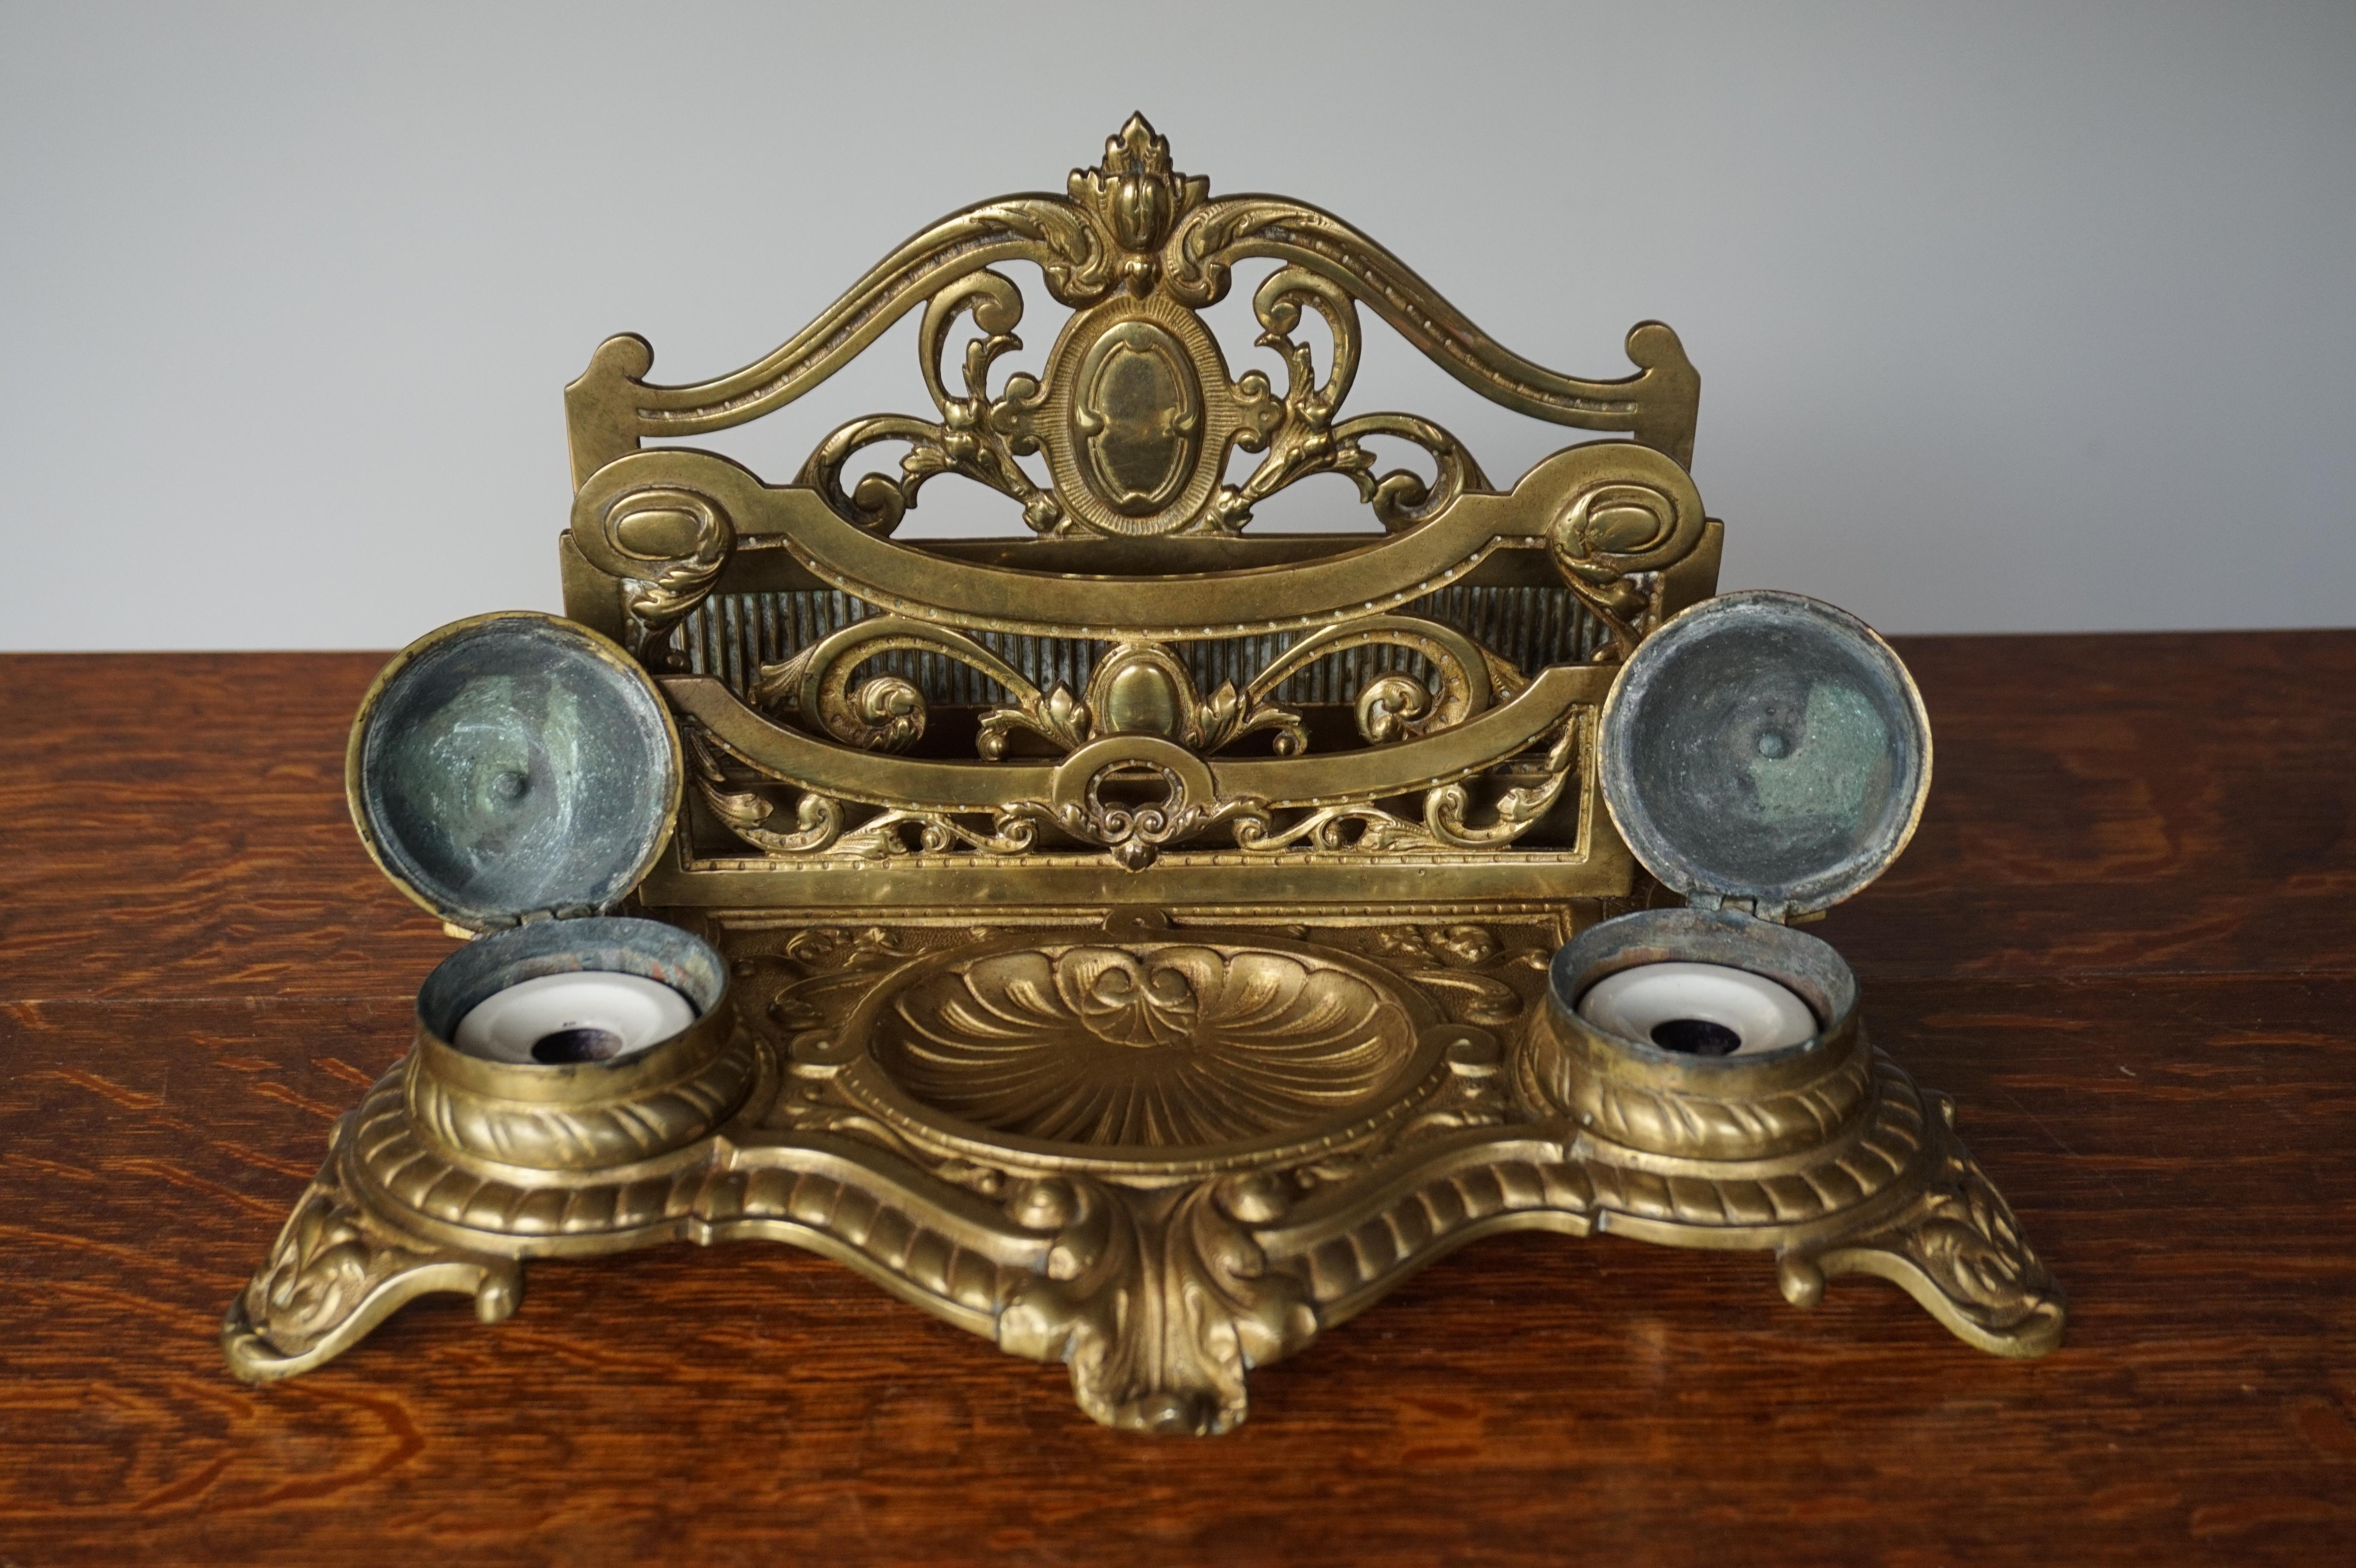 Large, late 19th century, hand-engraved bronze desk stand.

This antique and rather sizeable bronze inkstand is highly decorative, in very good condition and it is one of the heaviest we ever had the pleasure of offering. This solid bronze and heavy